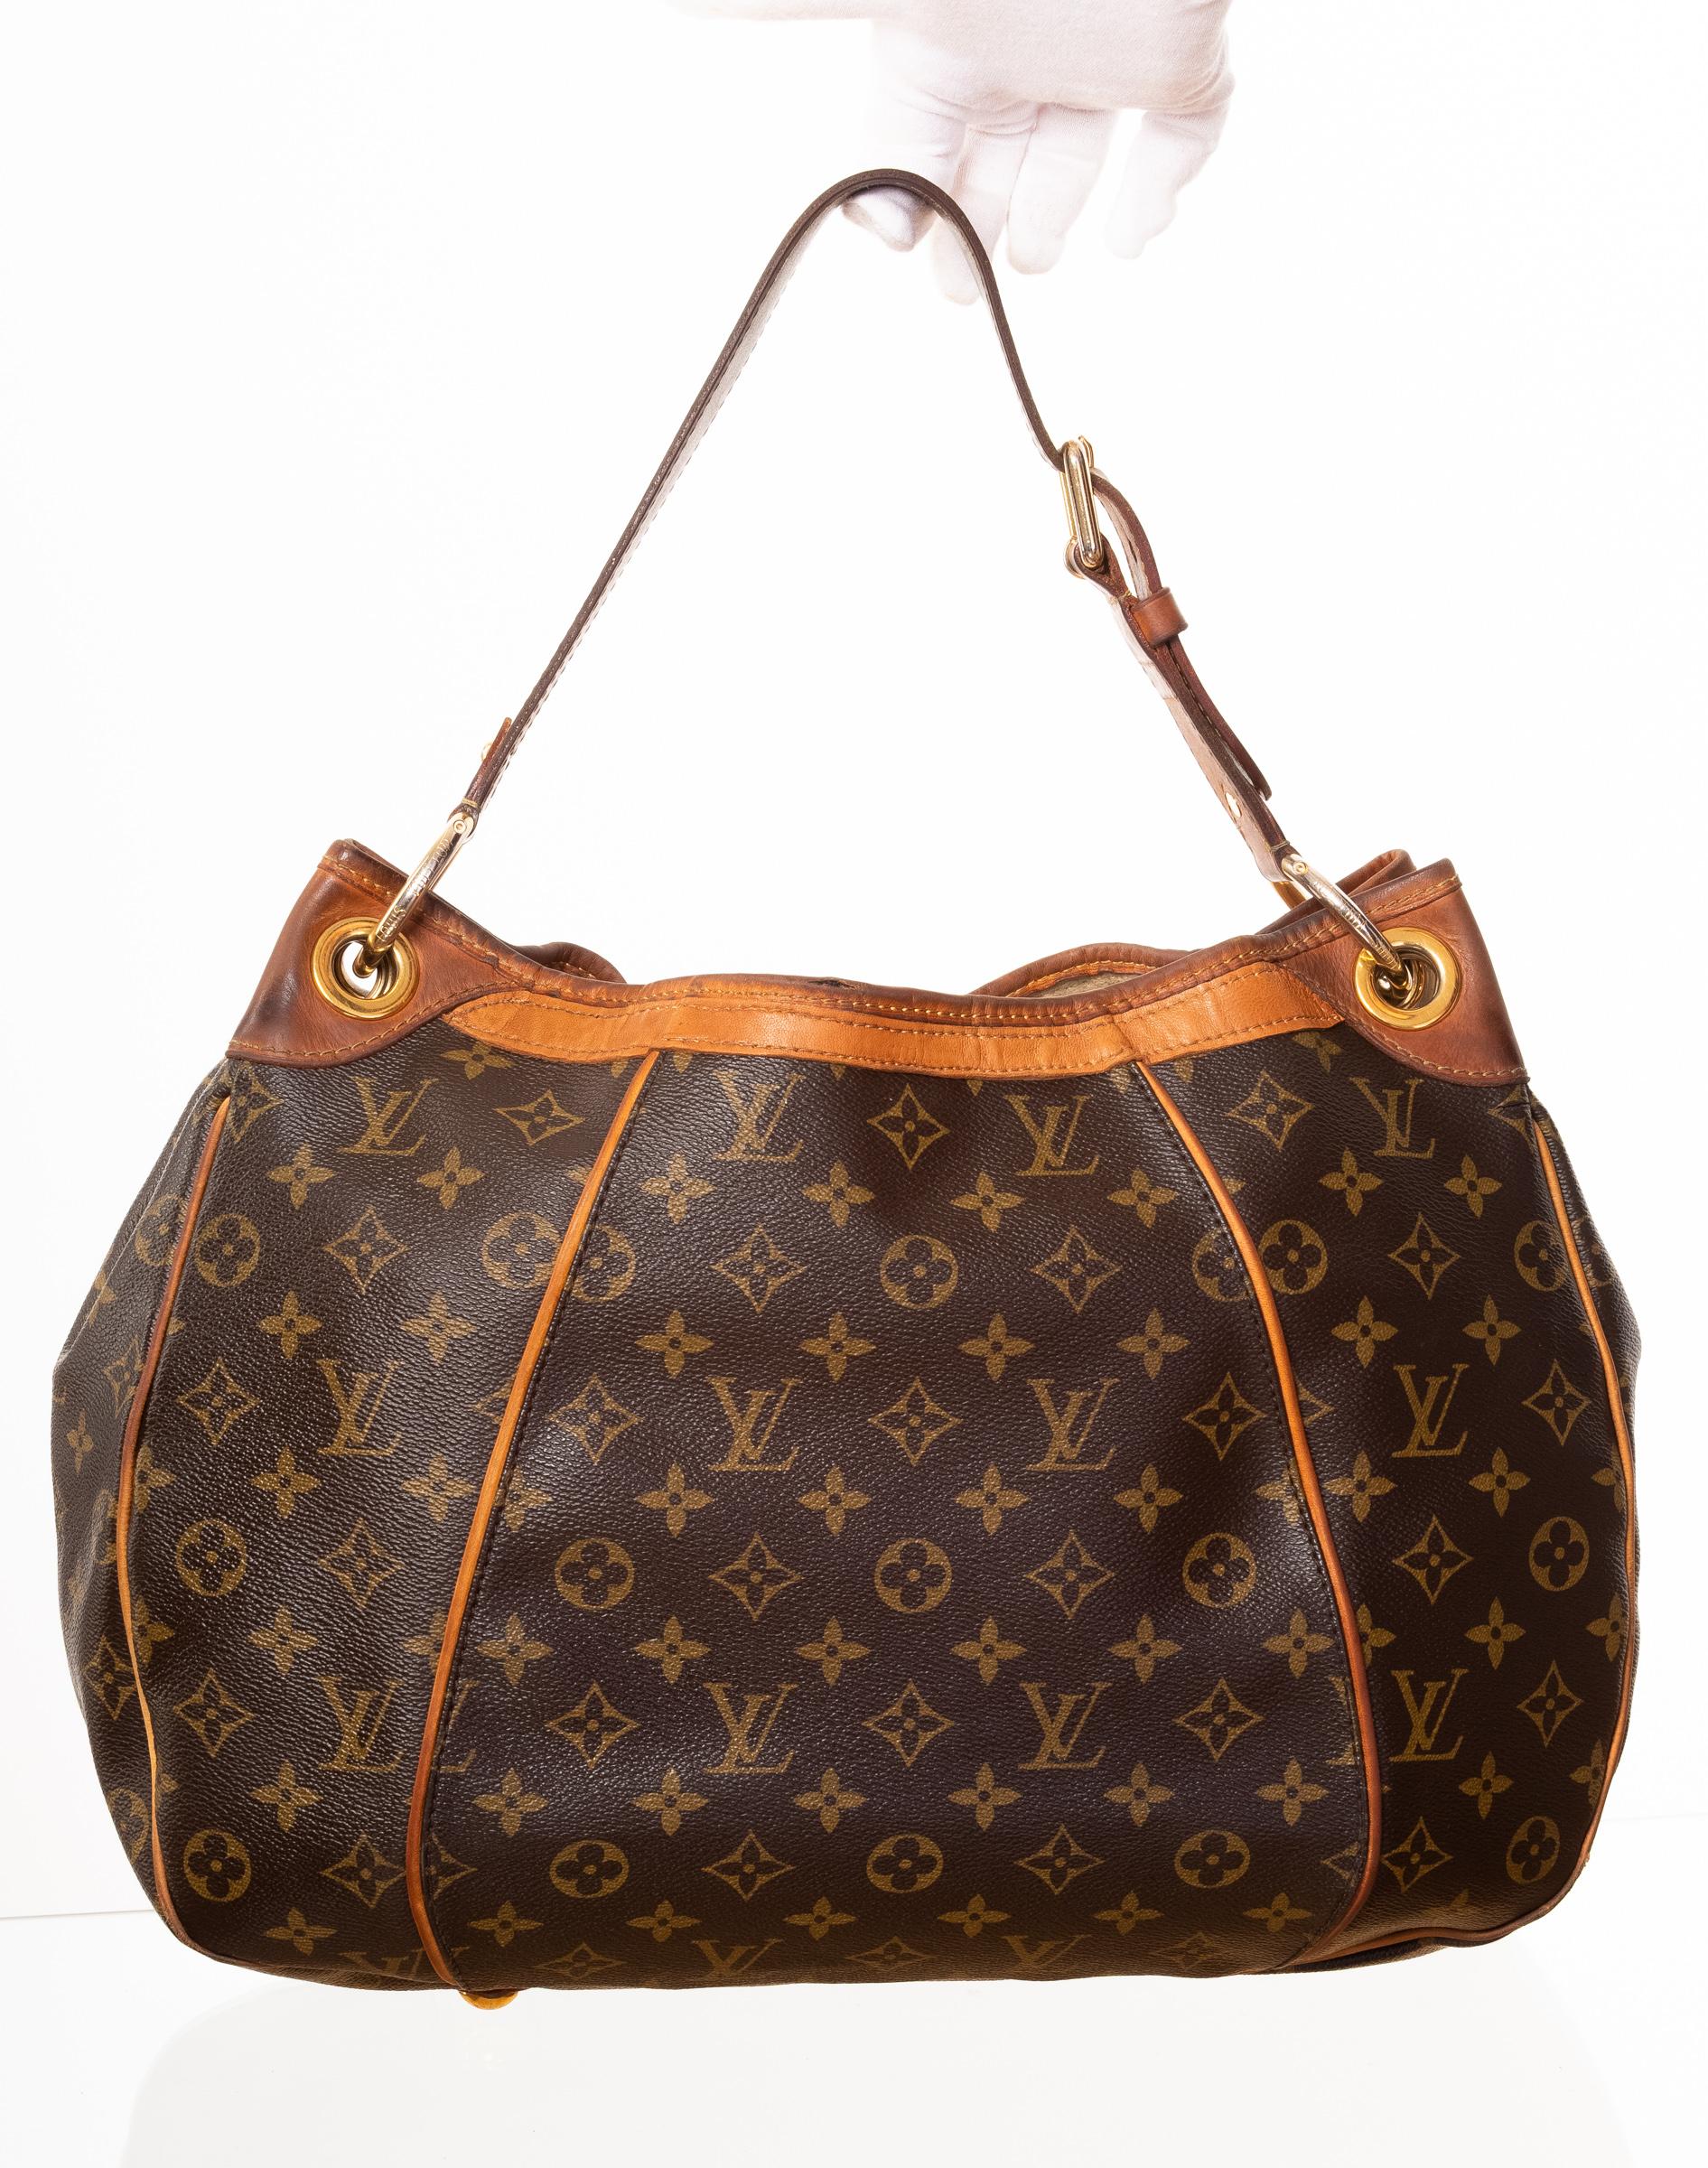 This vintage LV Galleria Bag is made with brown Monogram canvas with vachetta leather finishes and features an etched plate with logo at front, single shoulder strap, brass hardware and protective feet at base. Top snap closure and alcantara